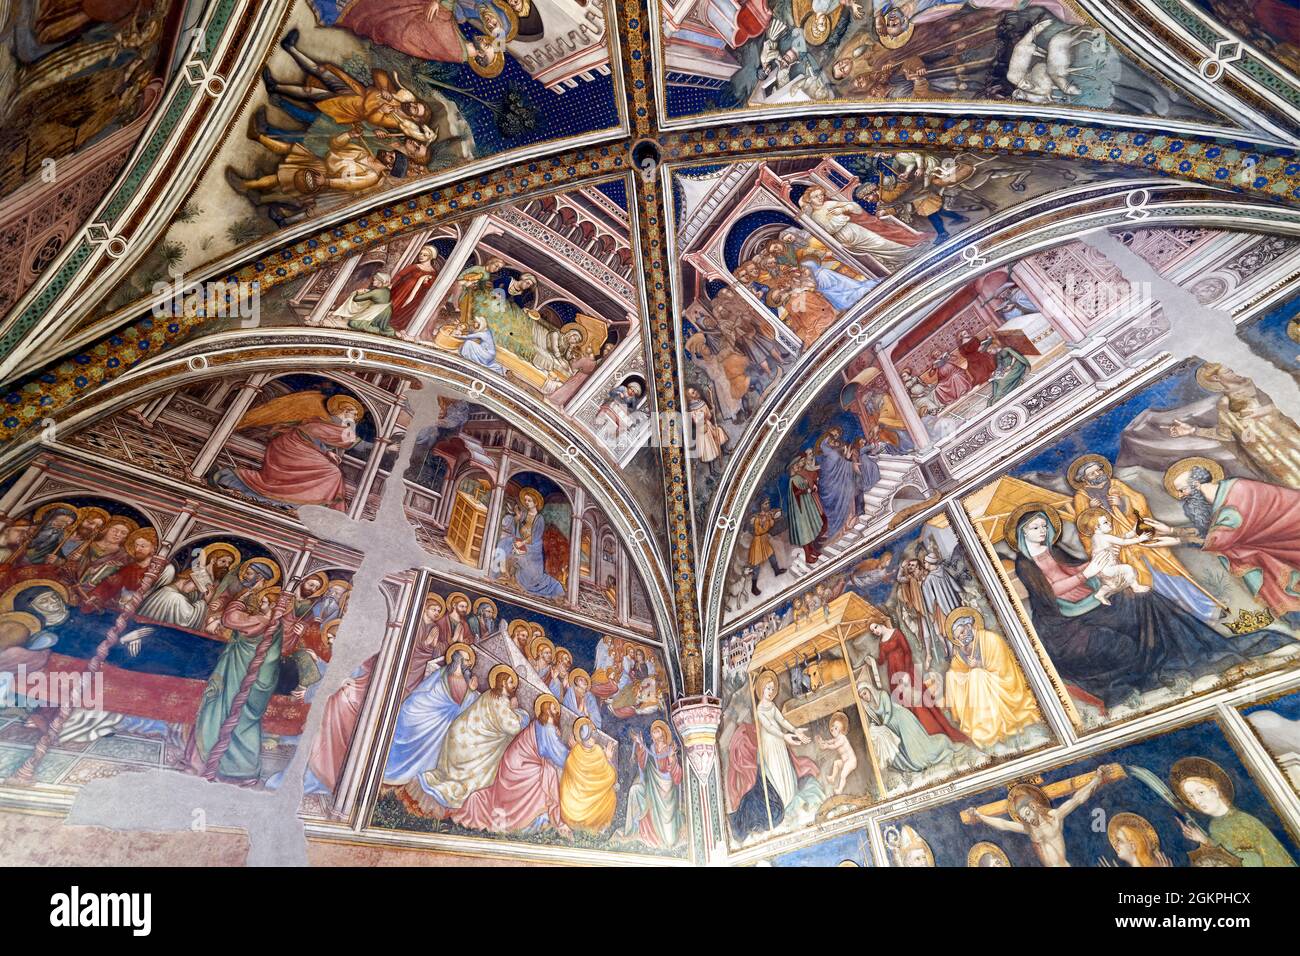 Foligno Umbria Italy. Frescoes at Trinci Palace (Palazzo Trinci), a patrician residence and museum. Stock Photo